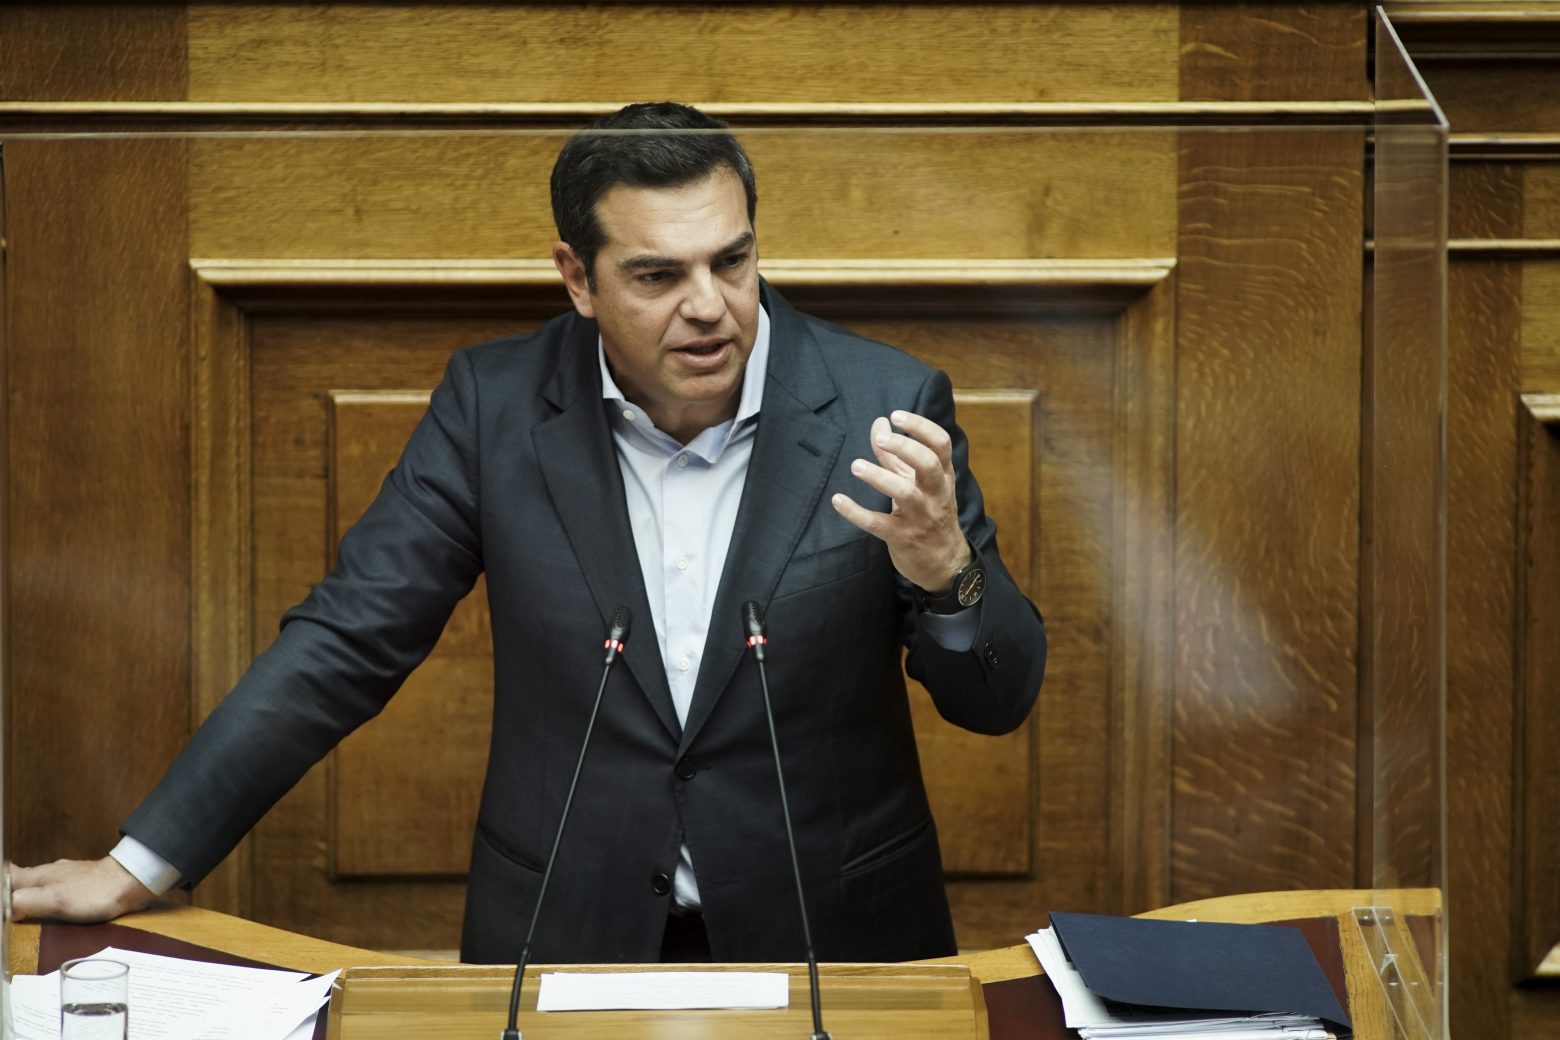 Tsipras – Mr. Mitsotakis has not realized the magnitude of the disaster